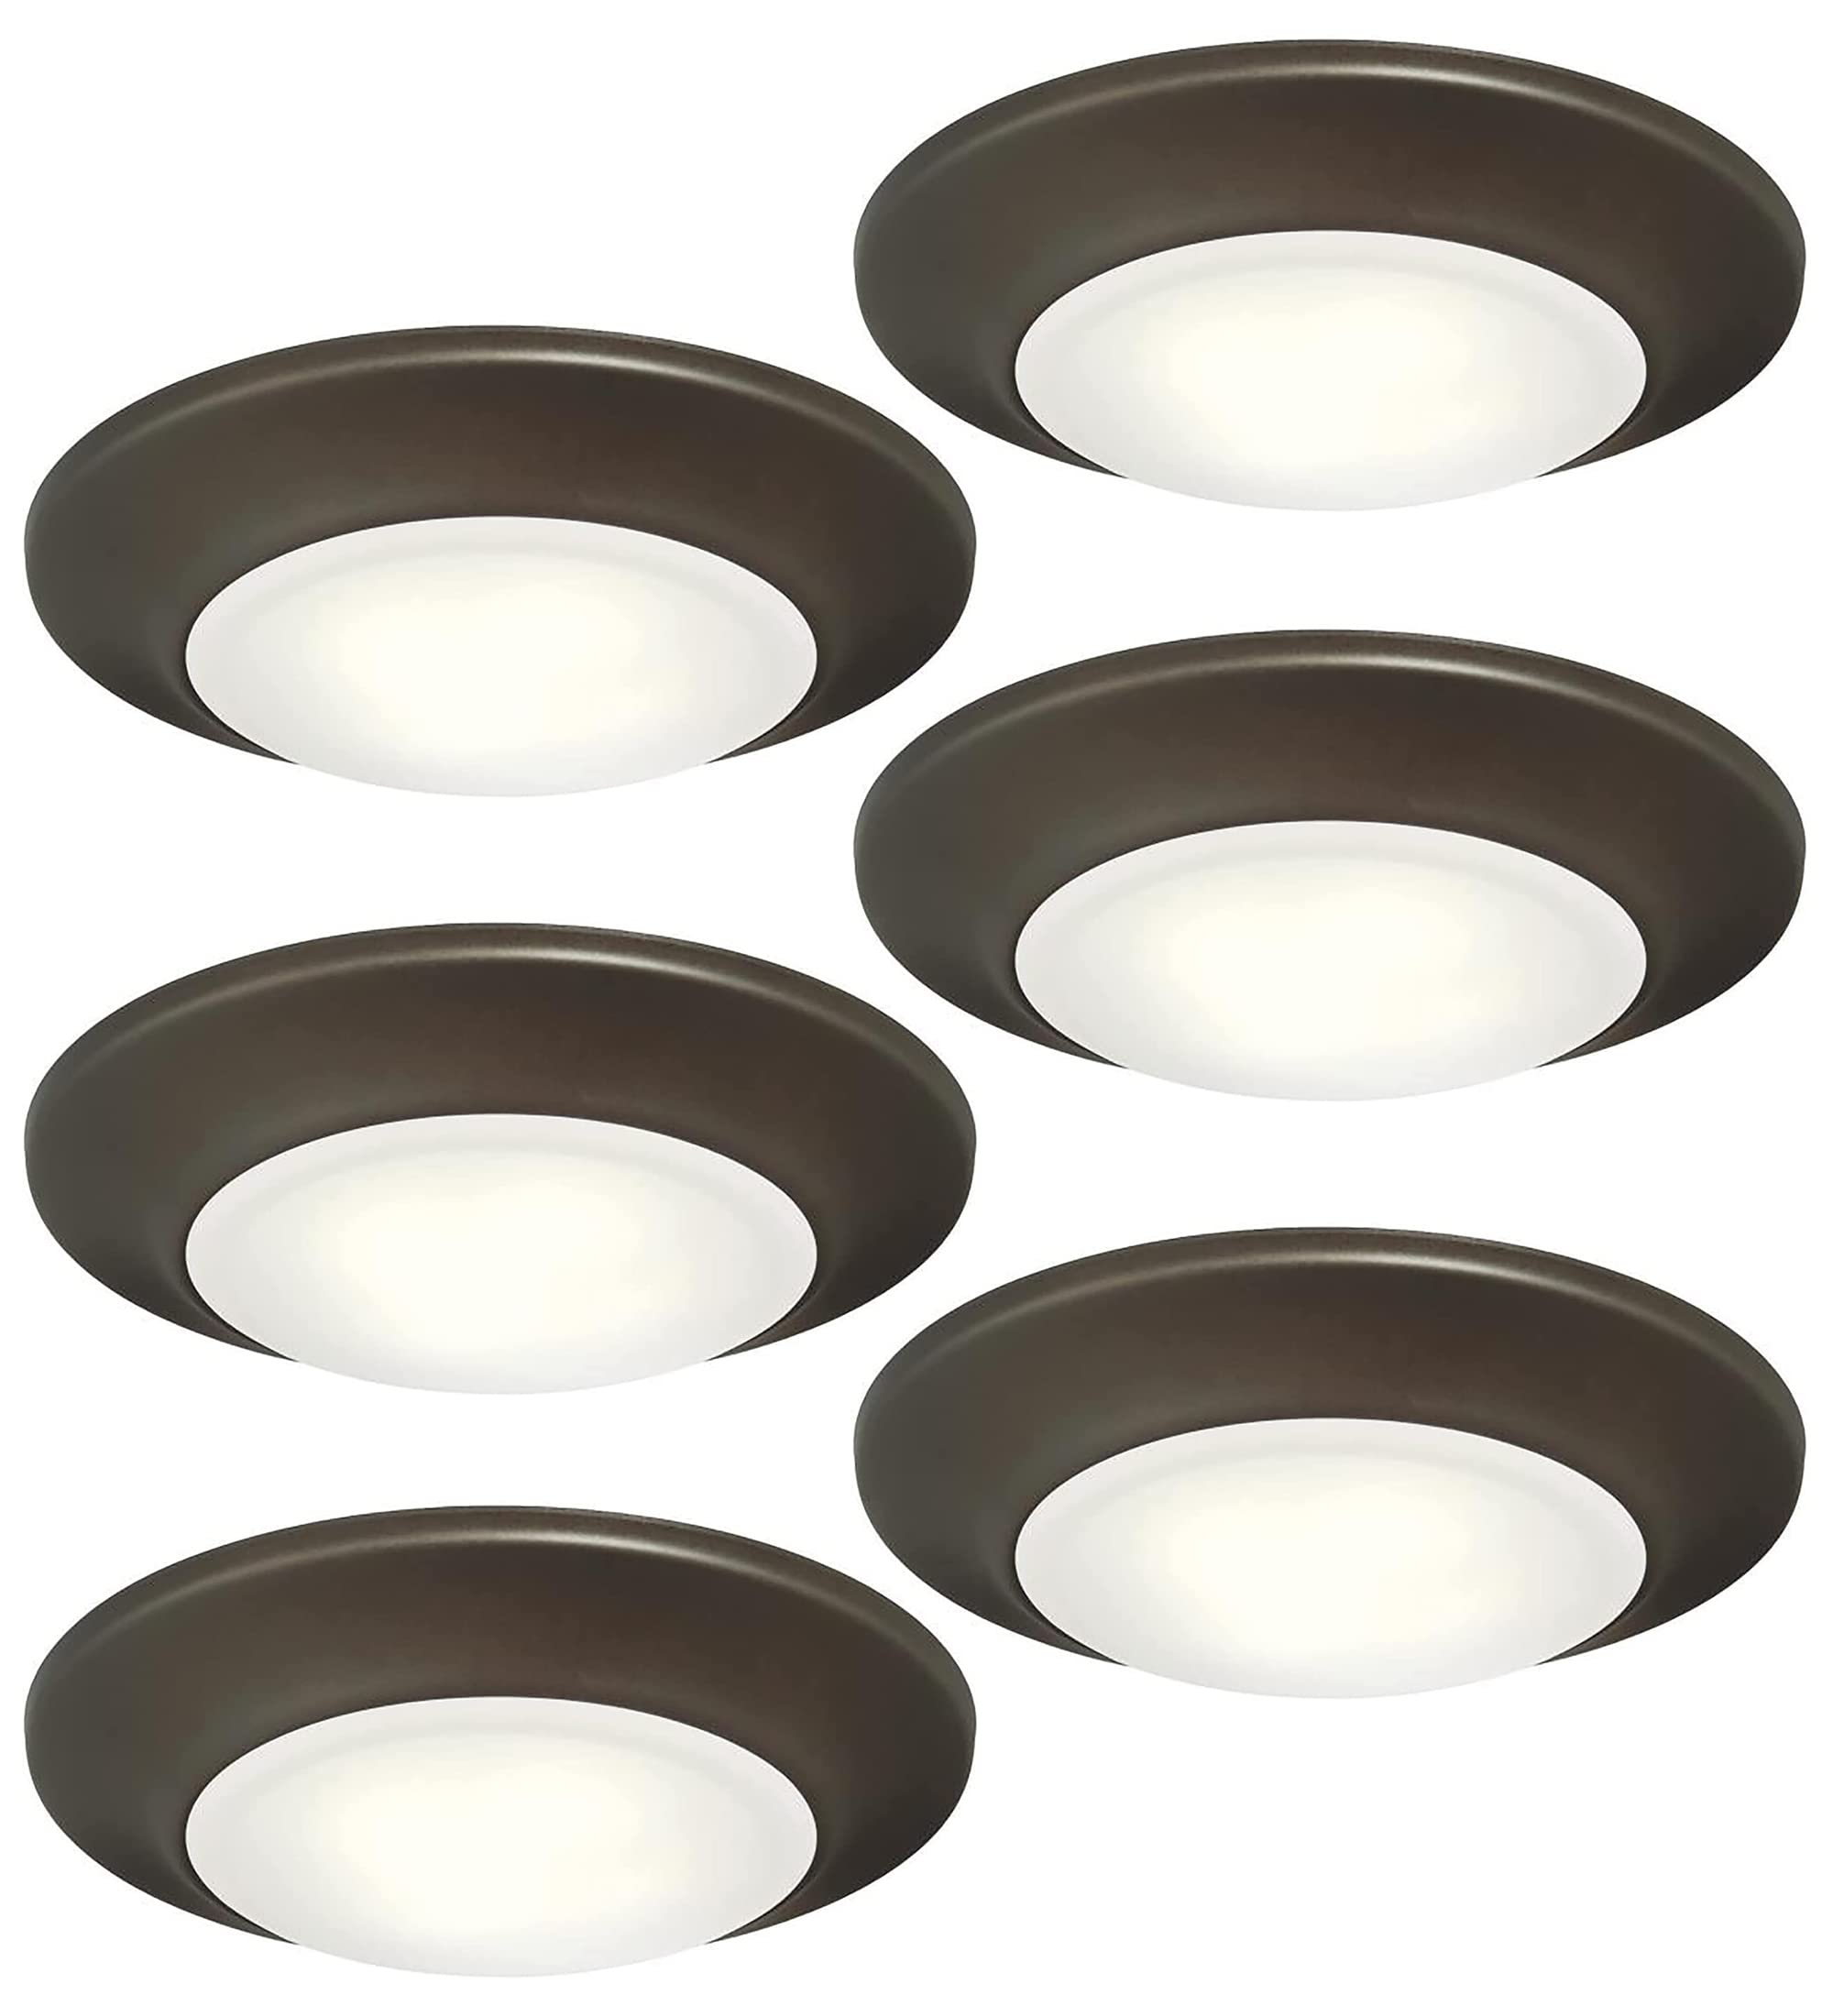 Ciata Lighting Round LED Disk Light Ceiling Flush Mount, Integrated LED Dimmable, Indoor/Outdoor, Energy Saving, Frosted Lens  - Like New